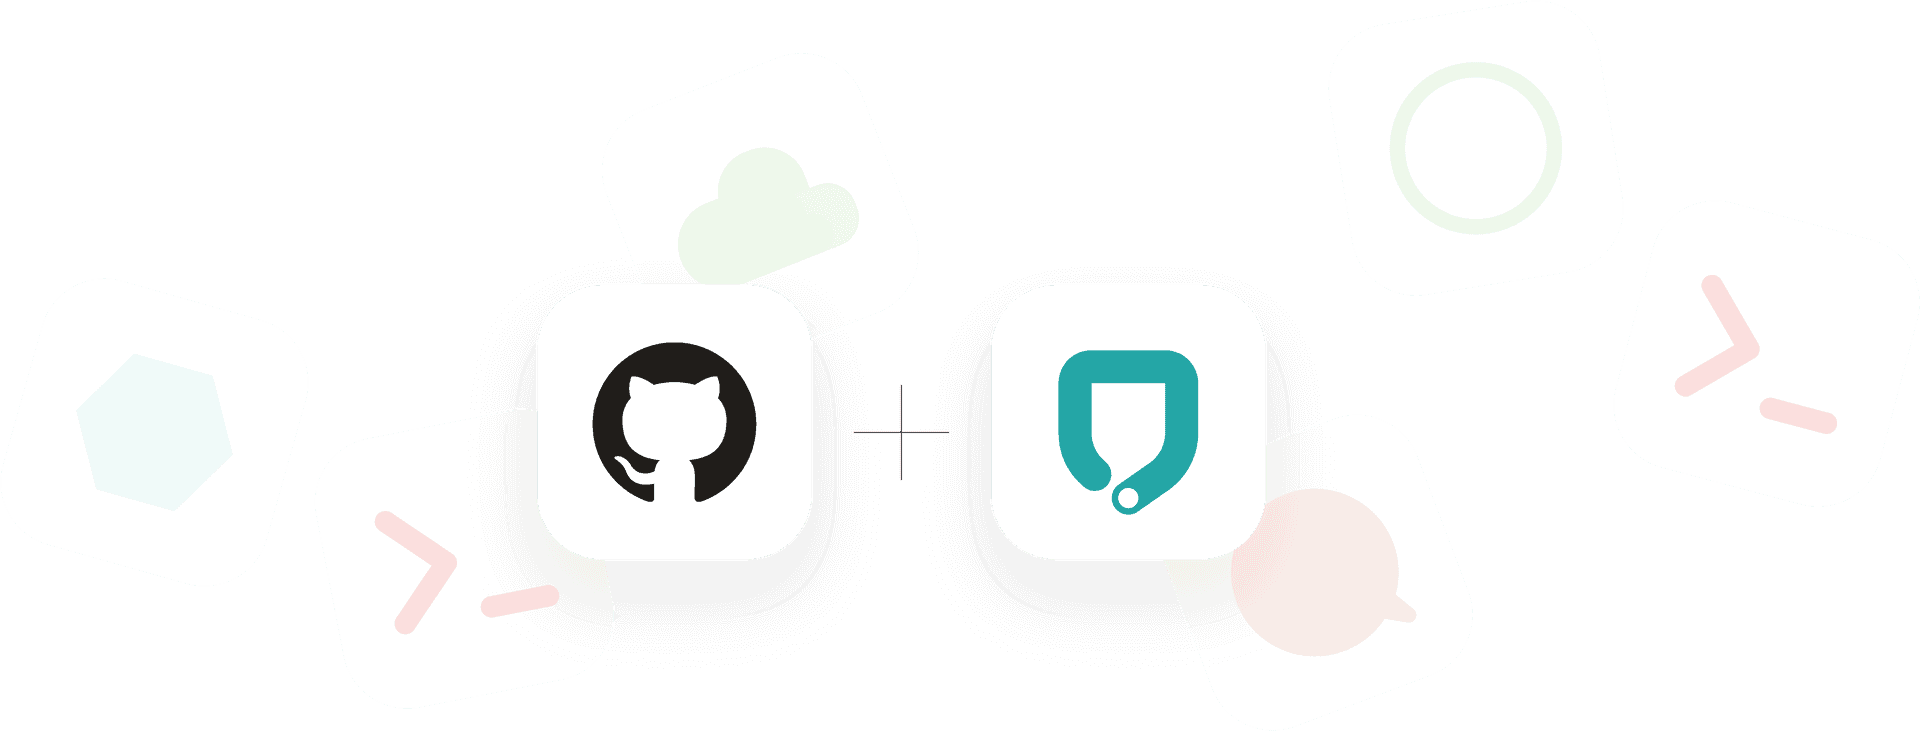 Git Hub Features Overview Illustration PNG image